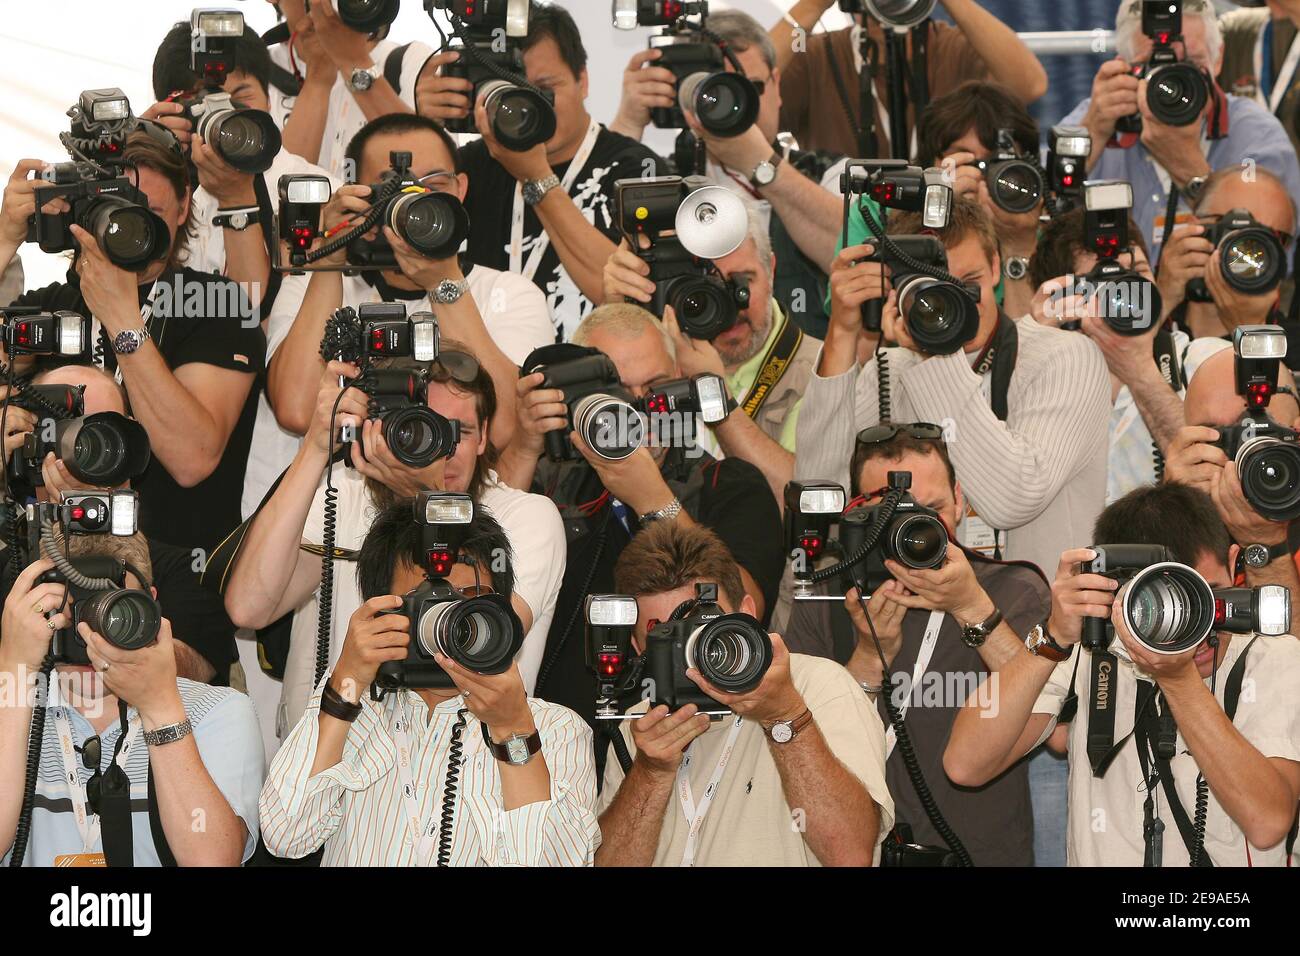 Photographers at work during the photocall for the film 'Marie-Antoinette' directed by Sofia Coppola, presented in competition at the 59th Cannes Film Festival, in Cannes, France, on May 24, 2006. Photo by Hahn-Nebinger-Orban/ABACAPRESS.COM Stock Photo